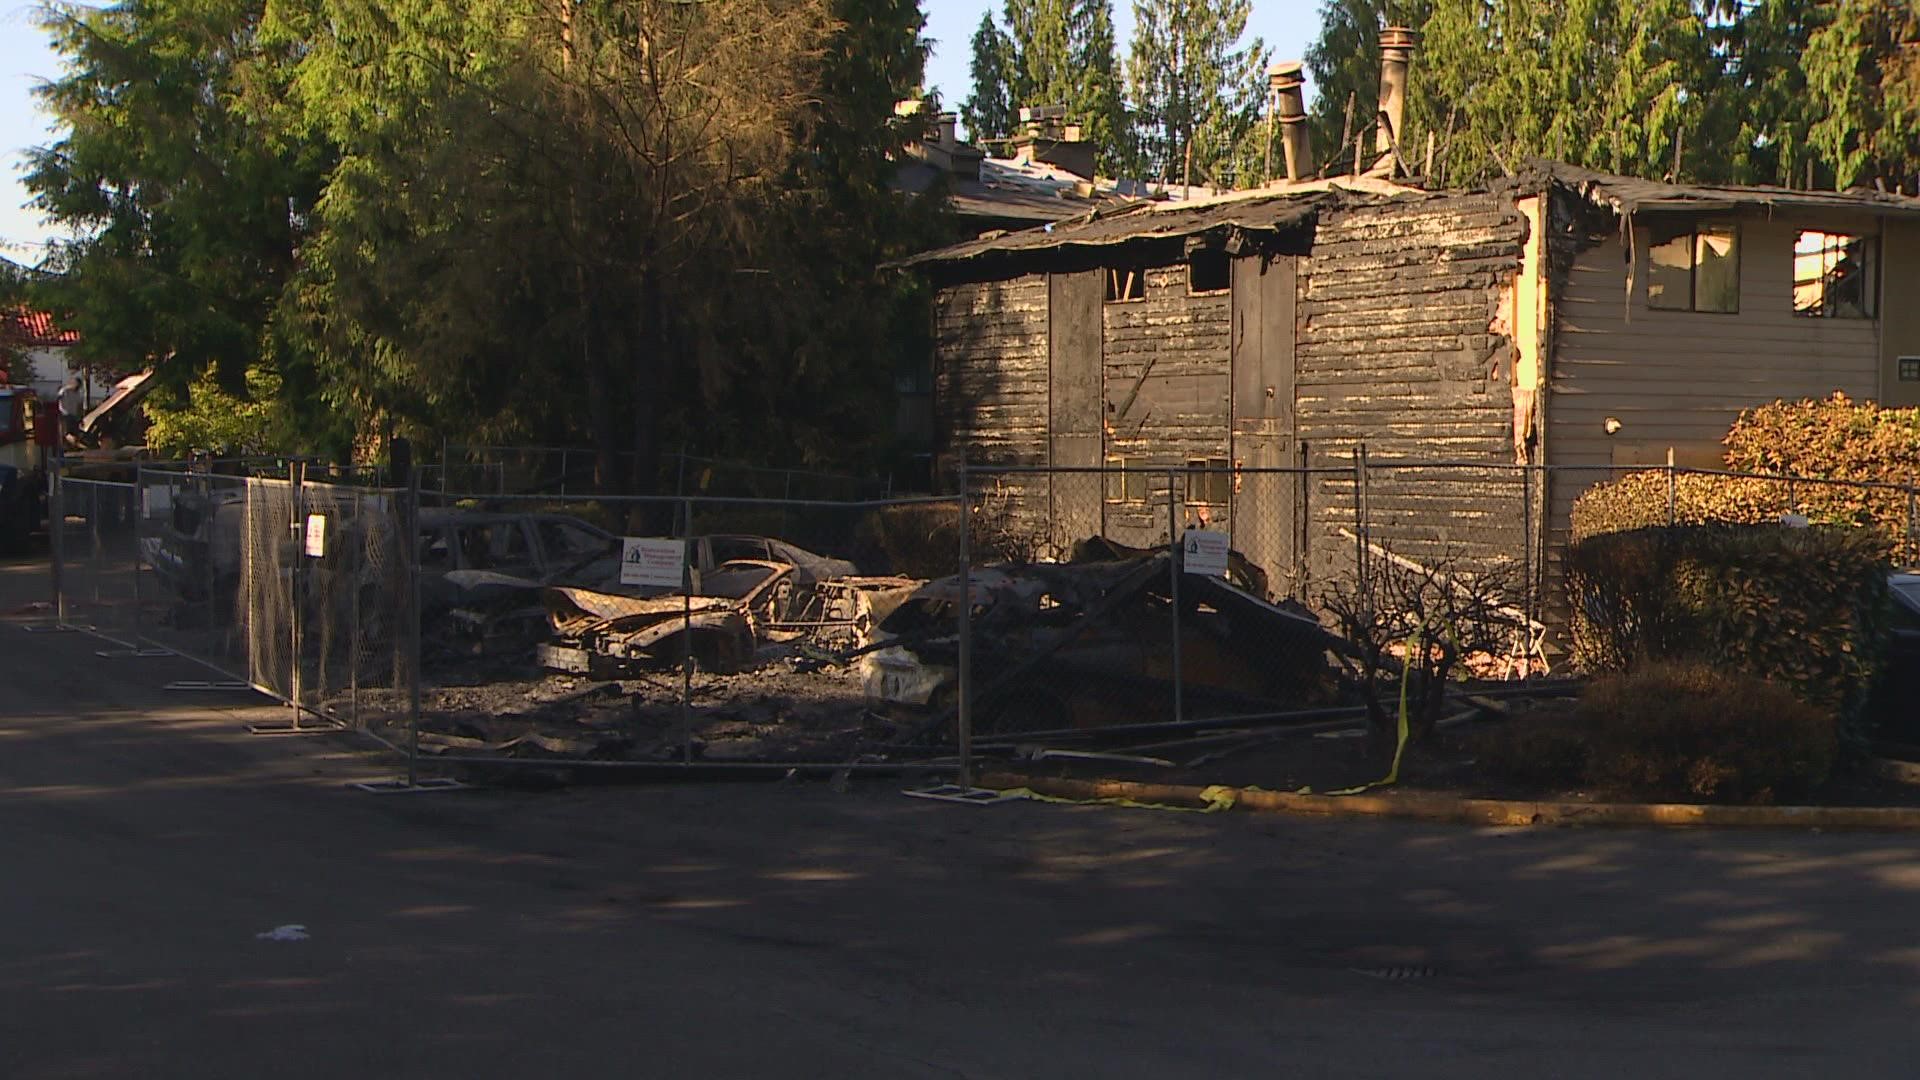 Twelve apartment units were destroyed. Local business owners are rallying together to help those who were displaced.